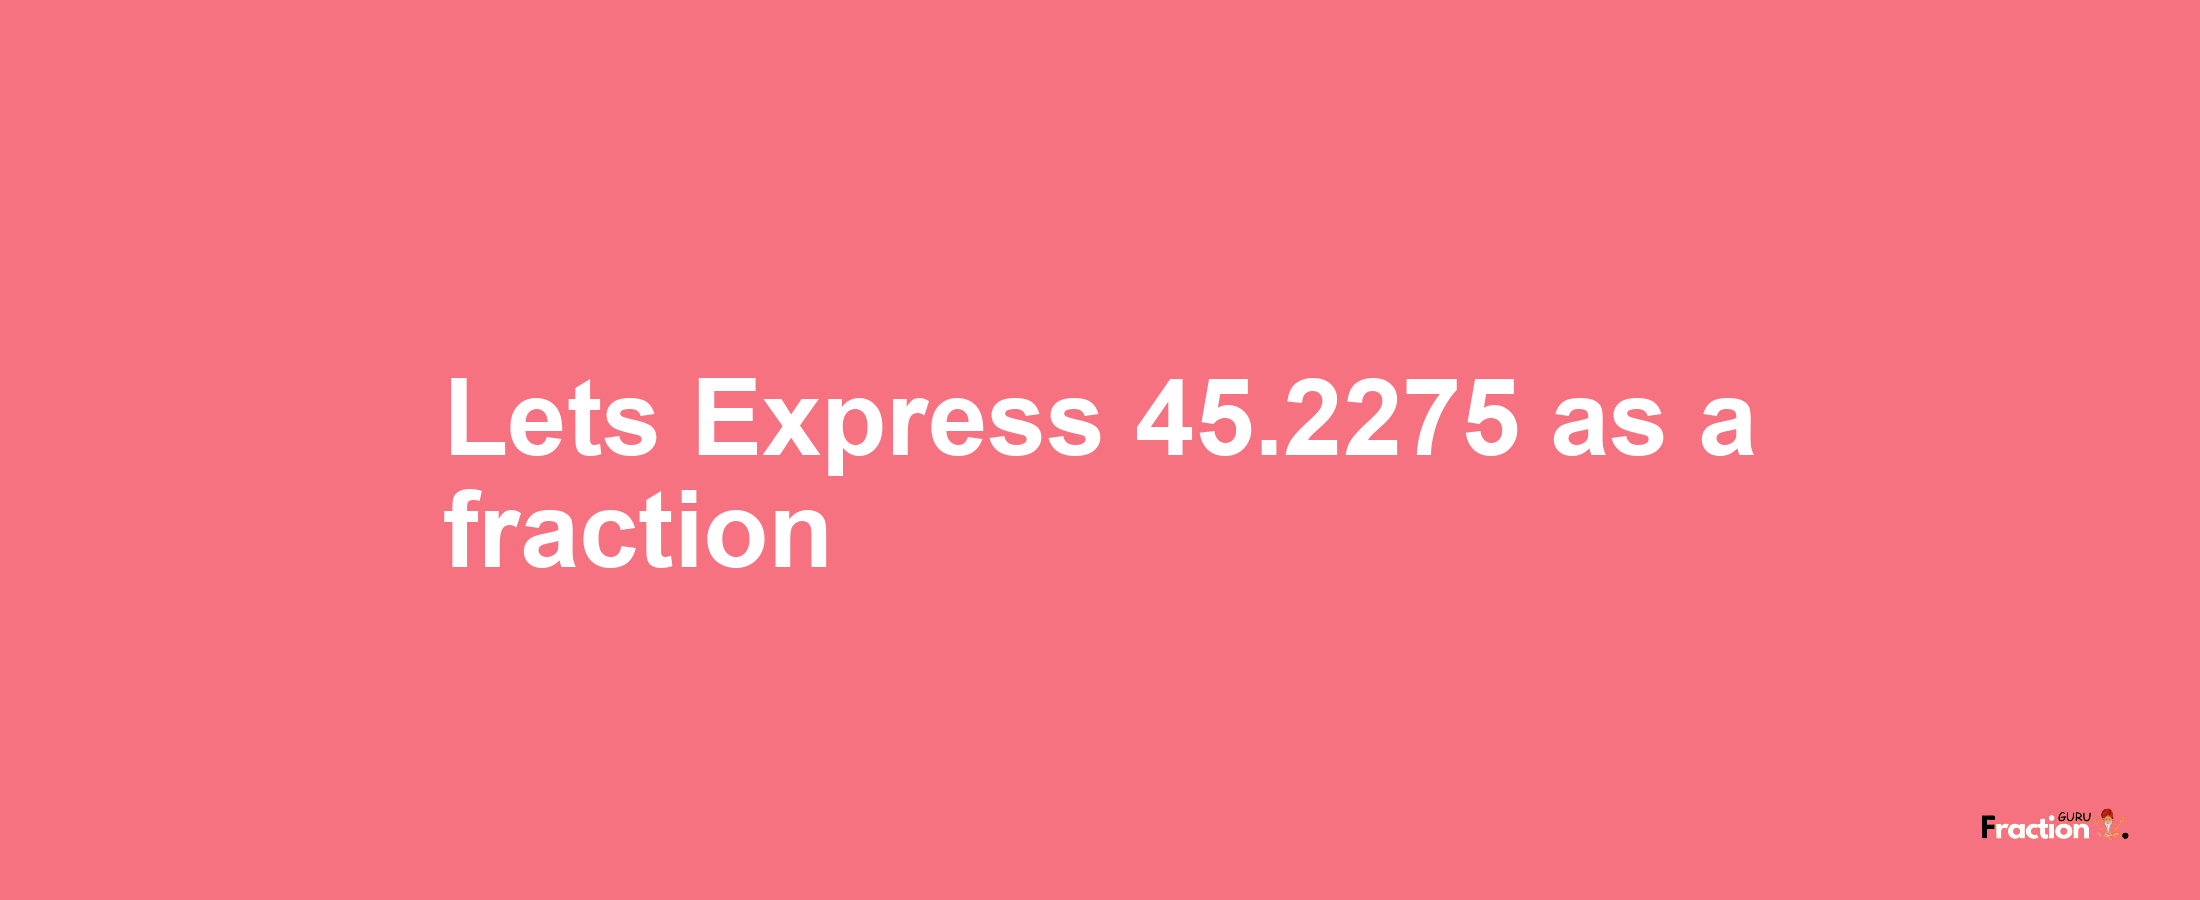 Lets Express 45.2275 as afraction